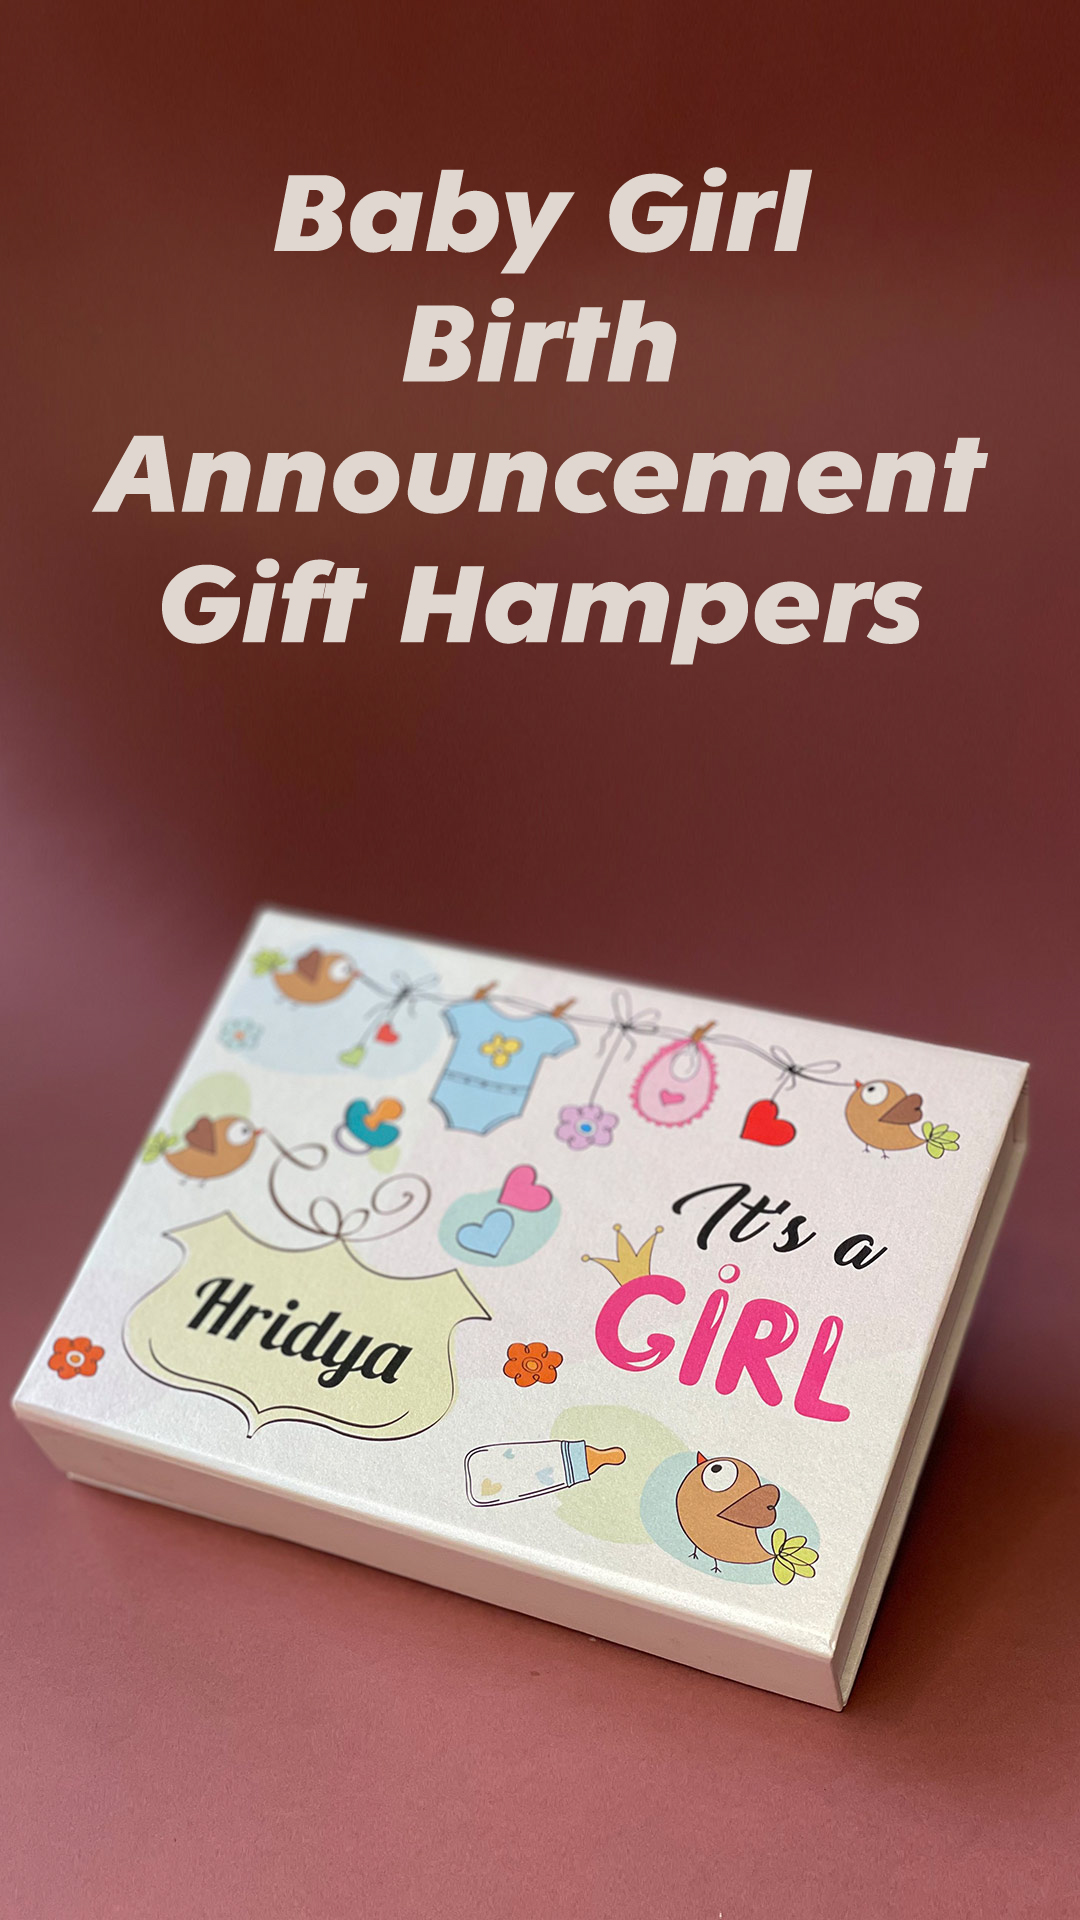 Baby Girl Birth announcement hamper boxes by chocovira in india